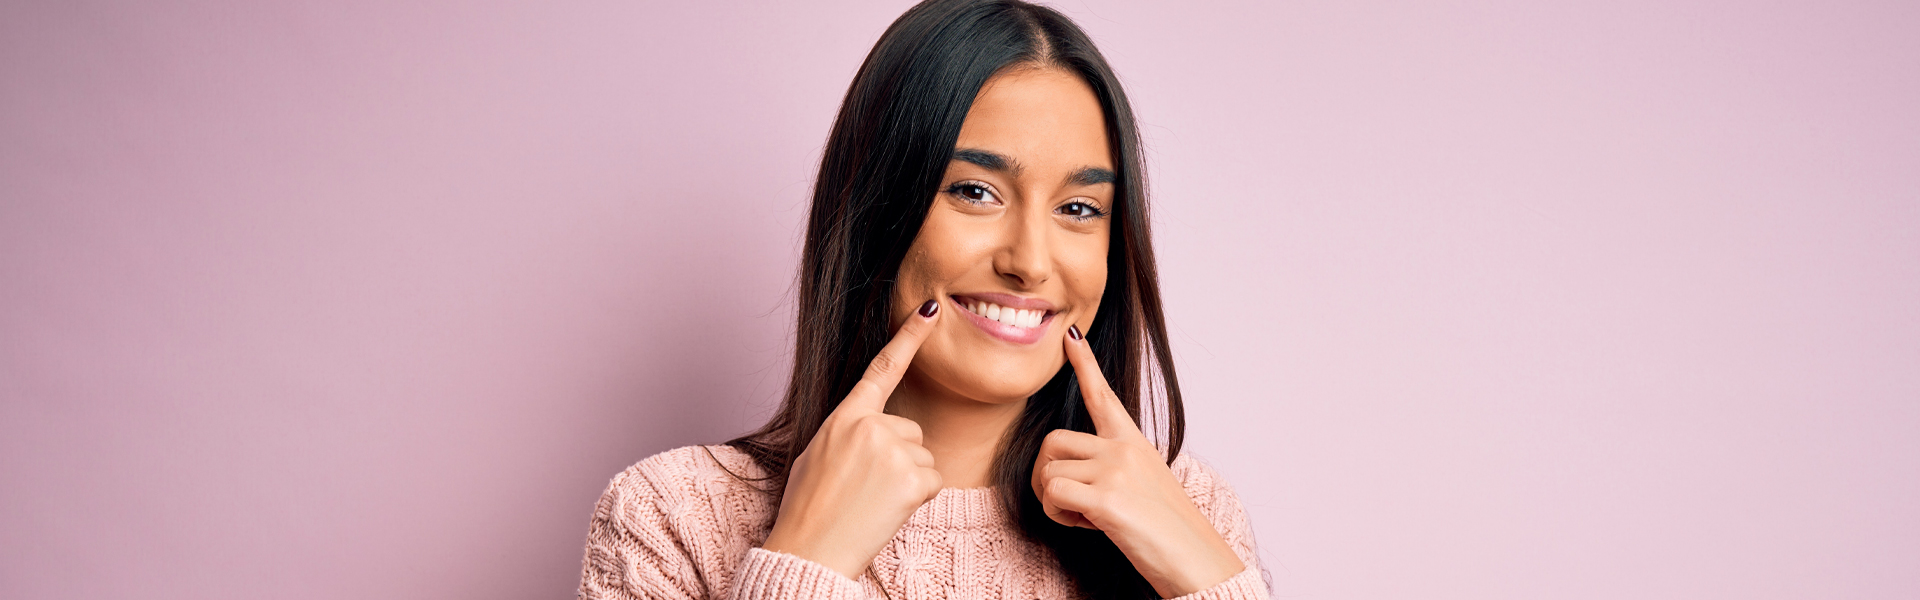 The Surprising Ways Cosmetic Dentistry Improves Your Self-Esteem